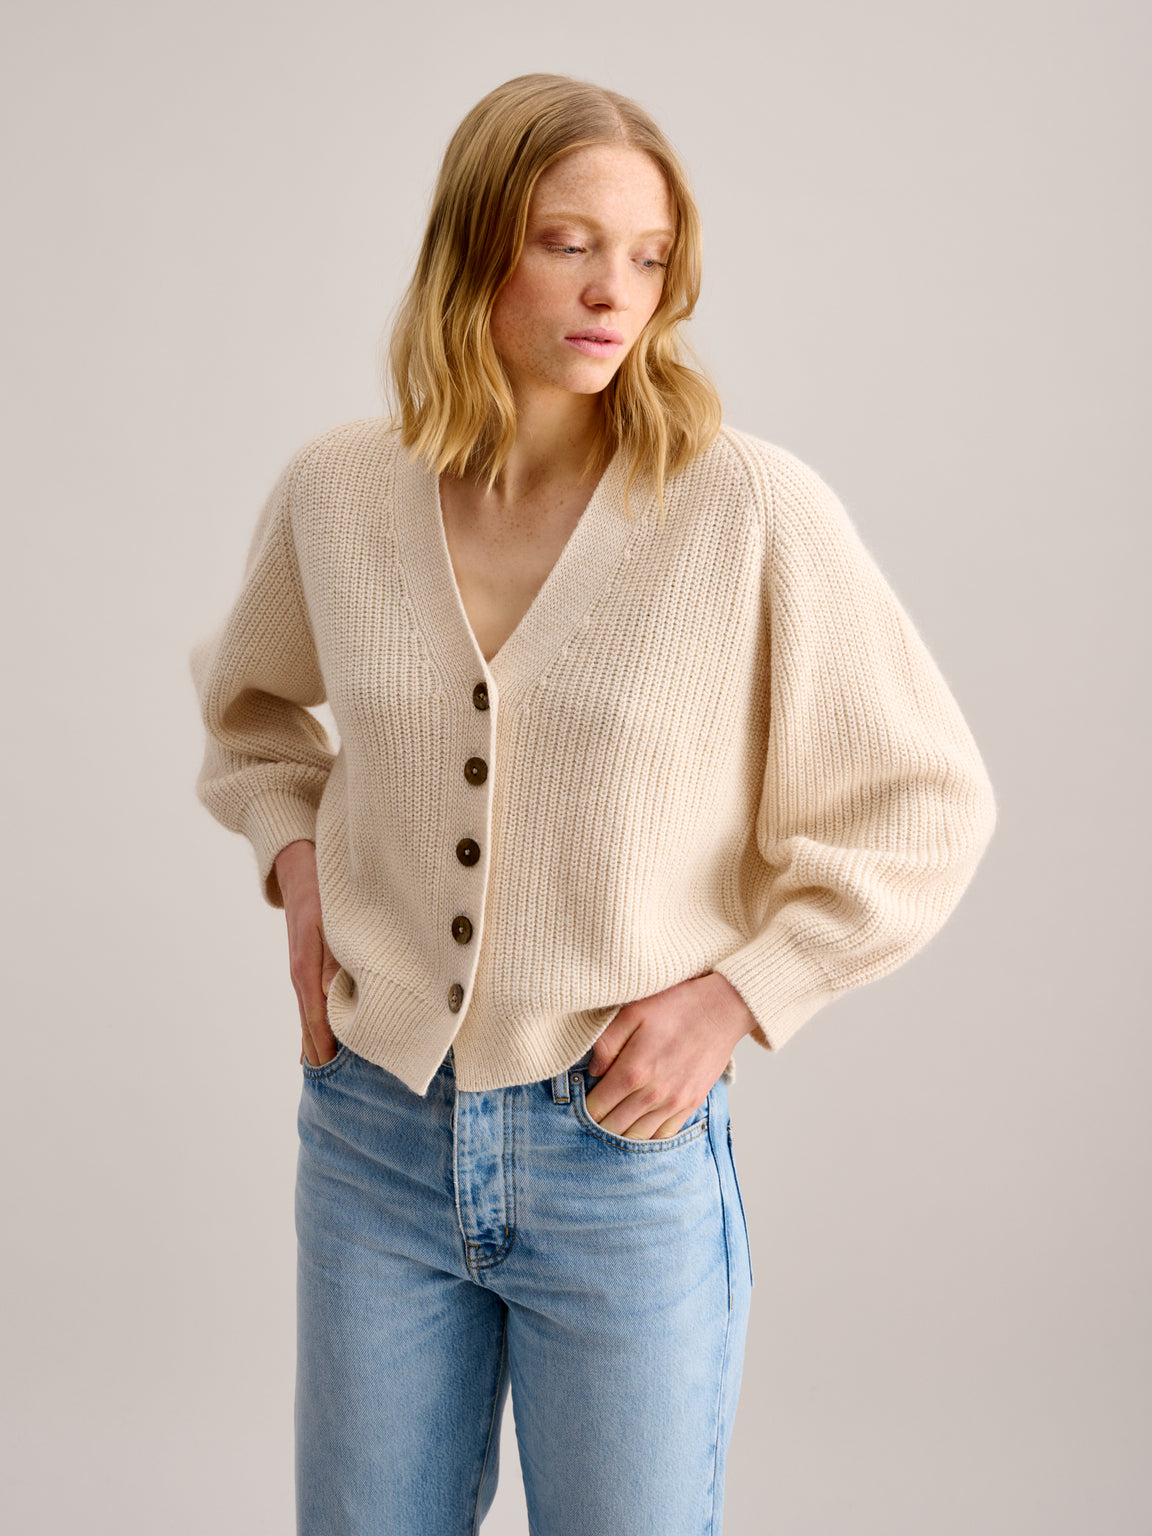 Dosany Cardigan - White | Women Collection | Bellerose